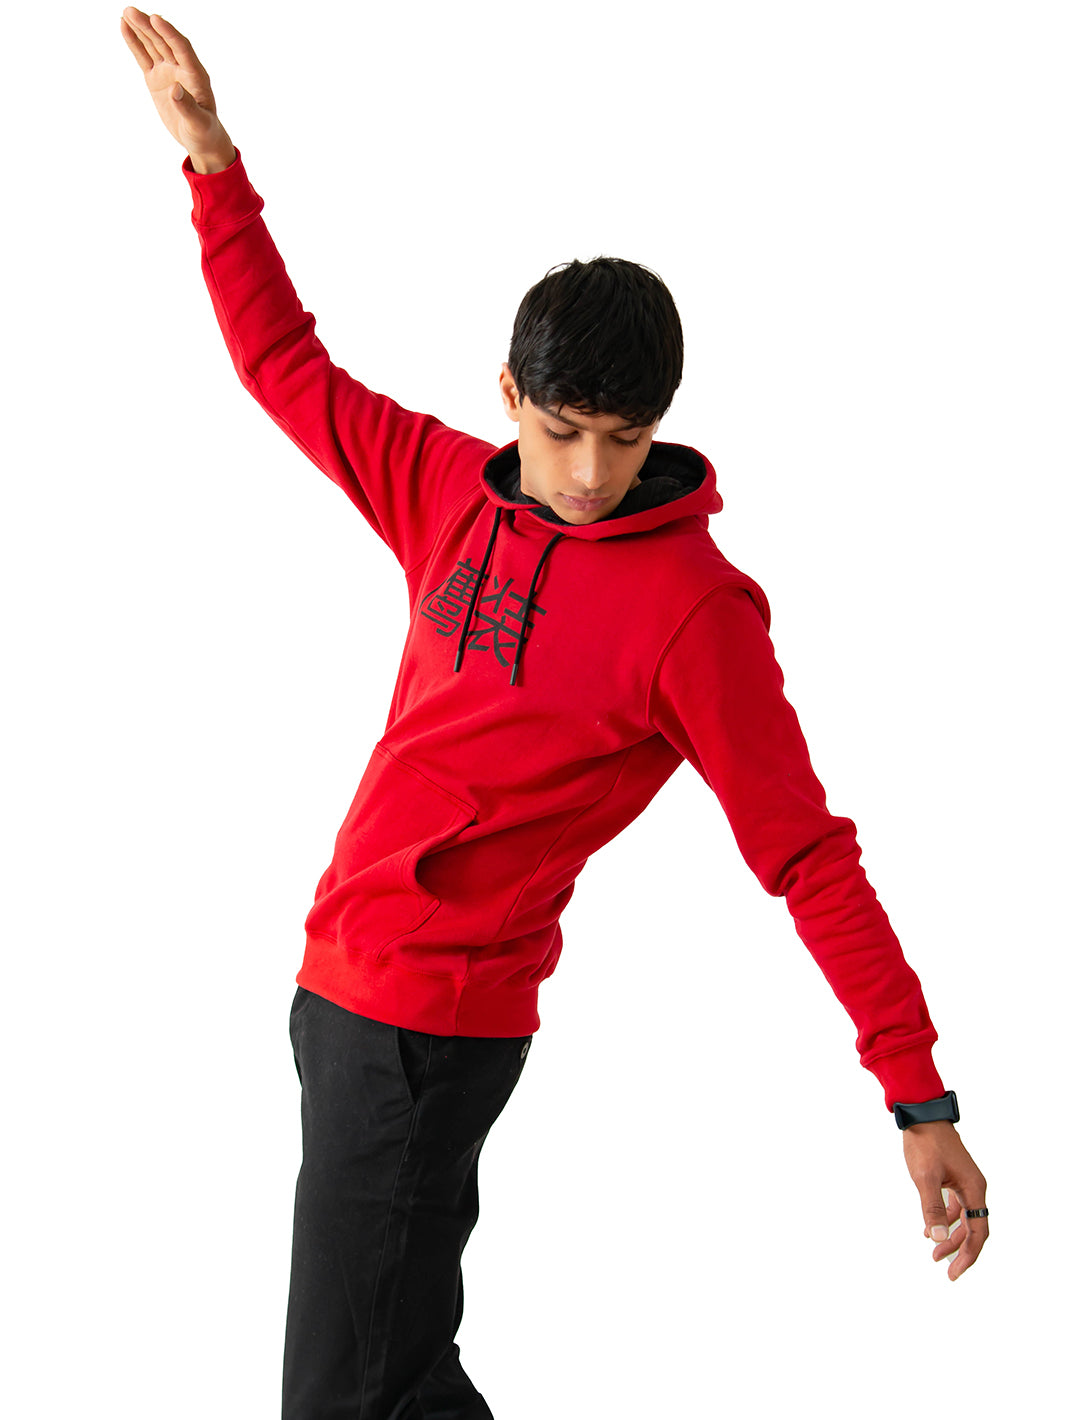 RED PULL OVER HOODIE - AZID